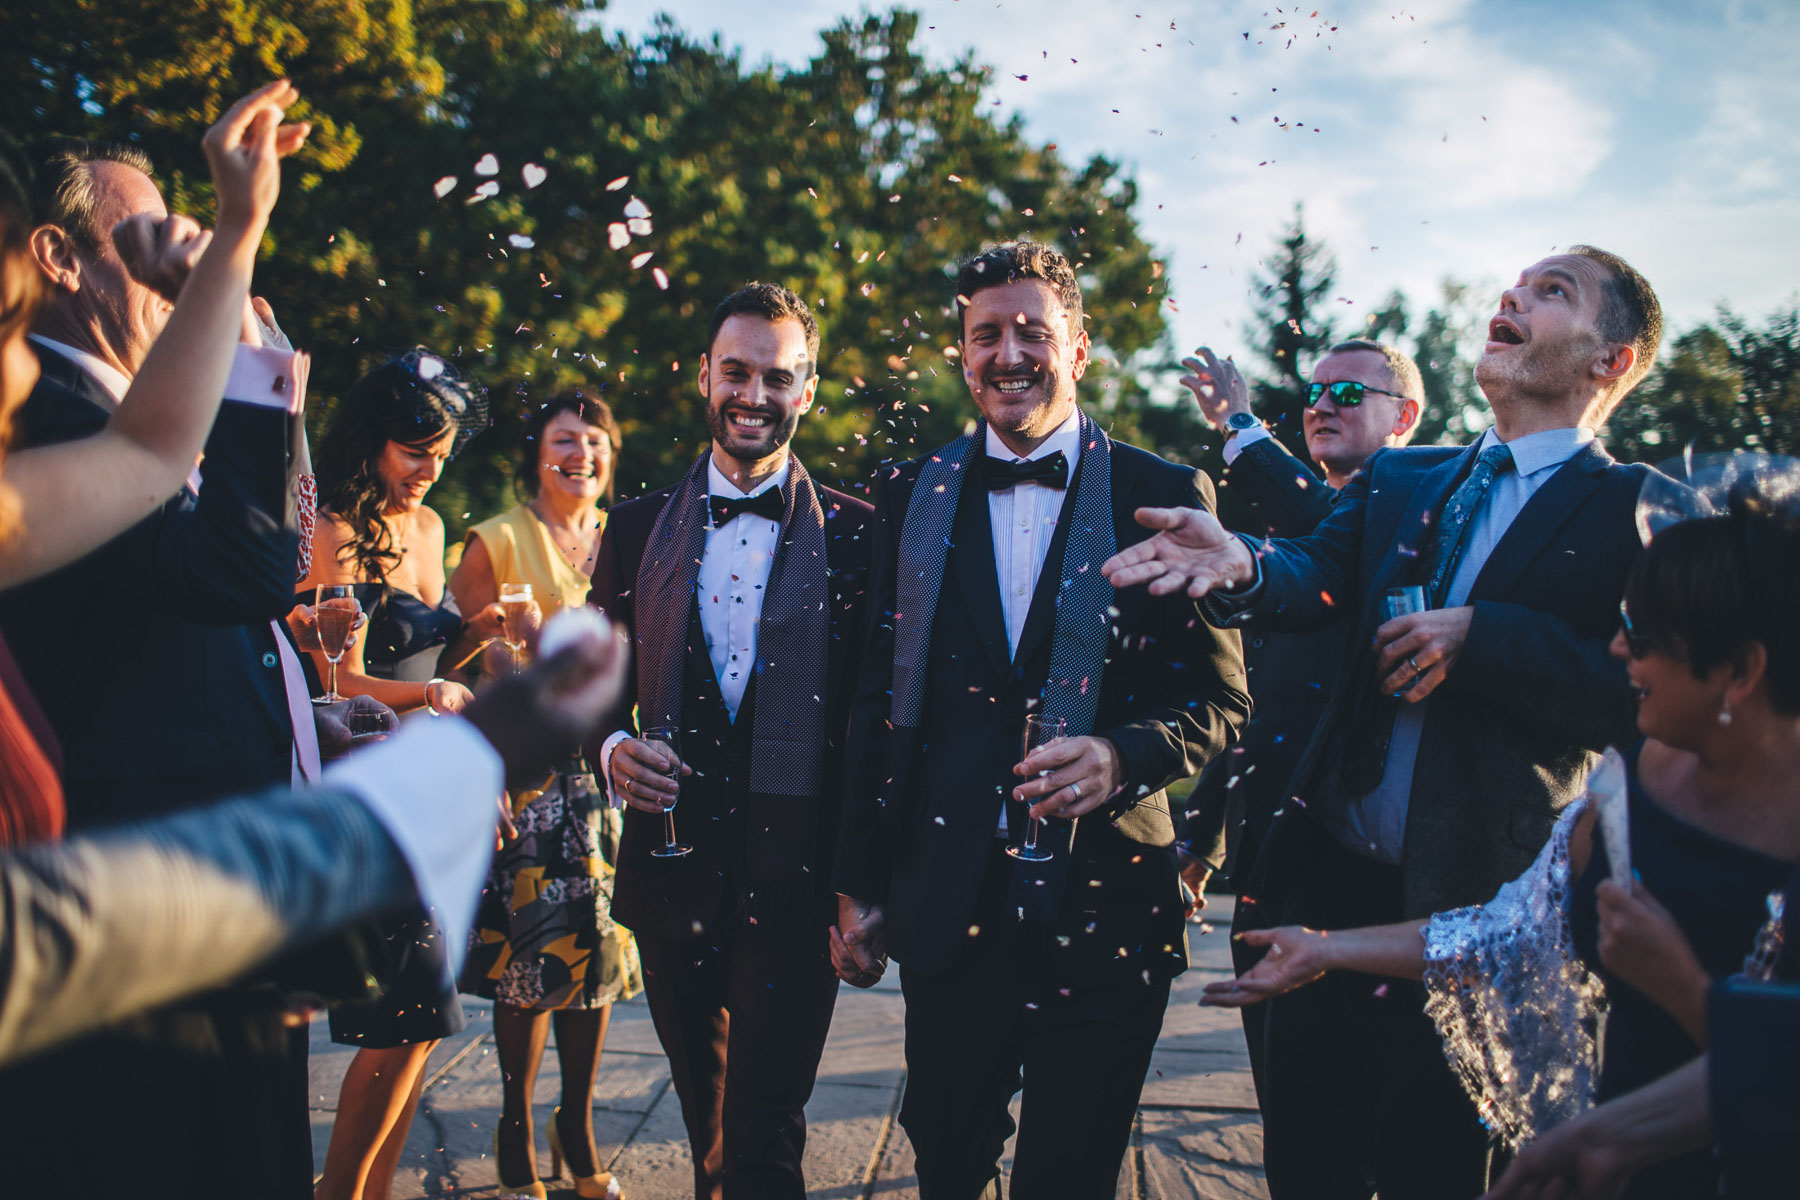 two groom wearing bow ties walk through a procession of confetti